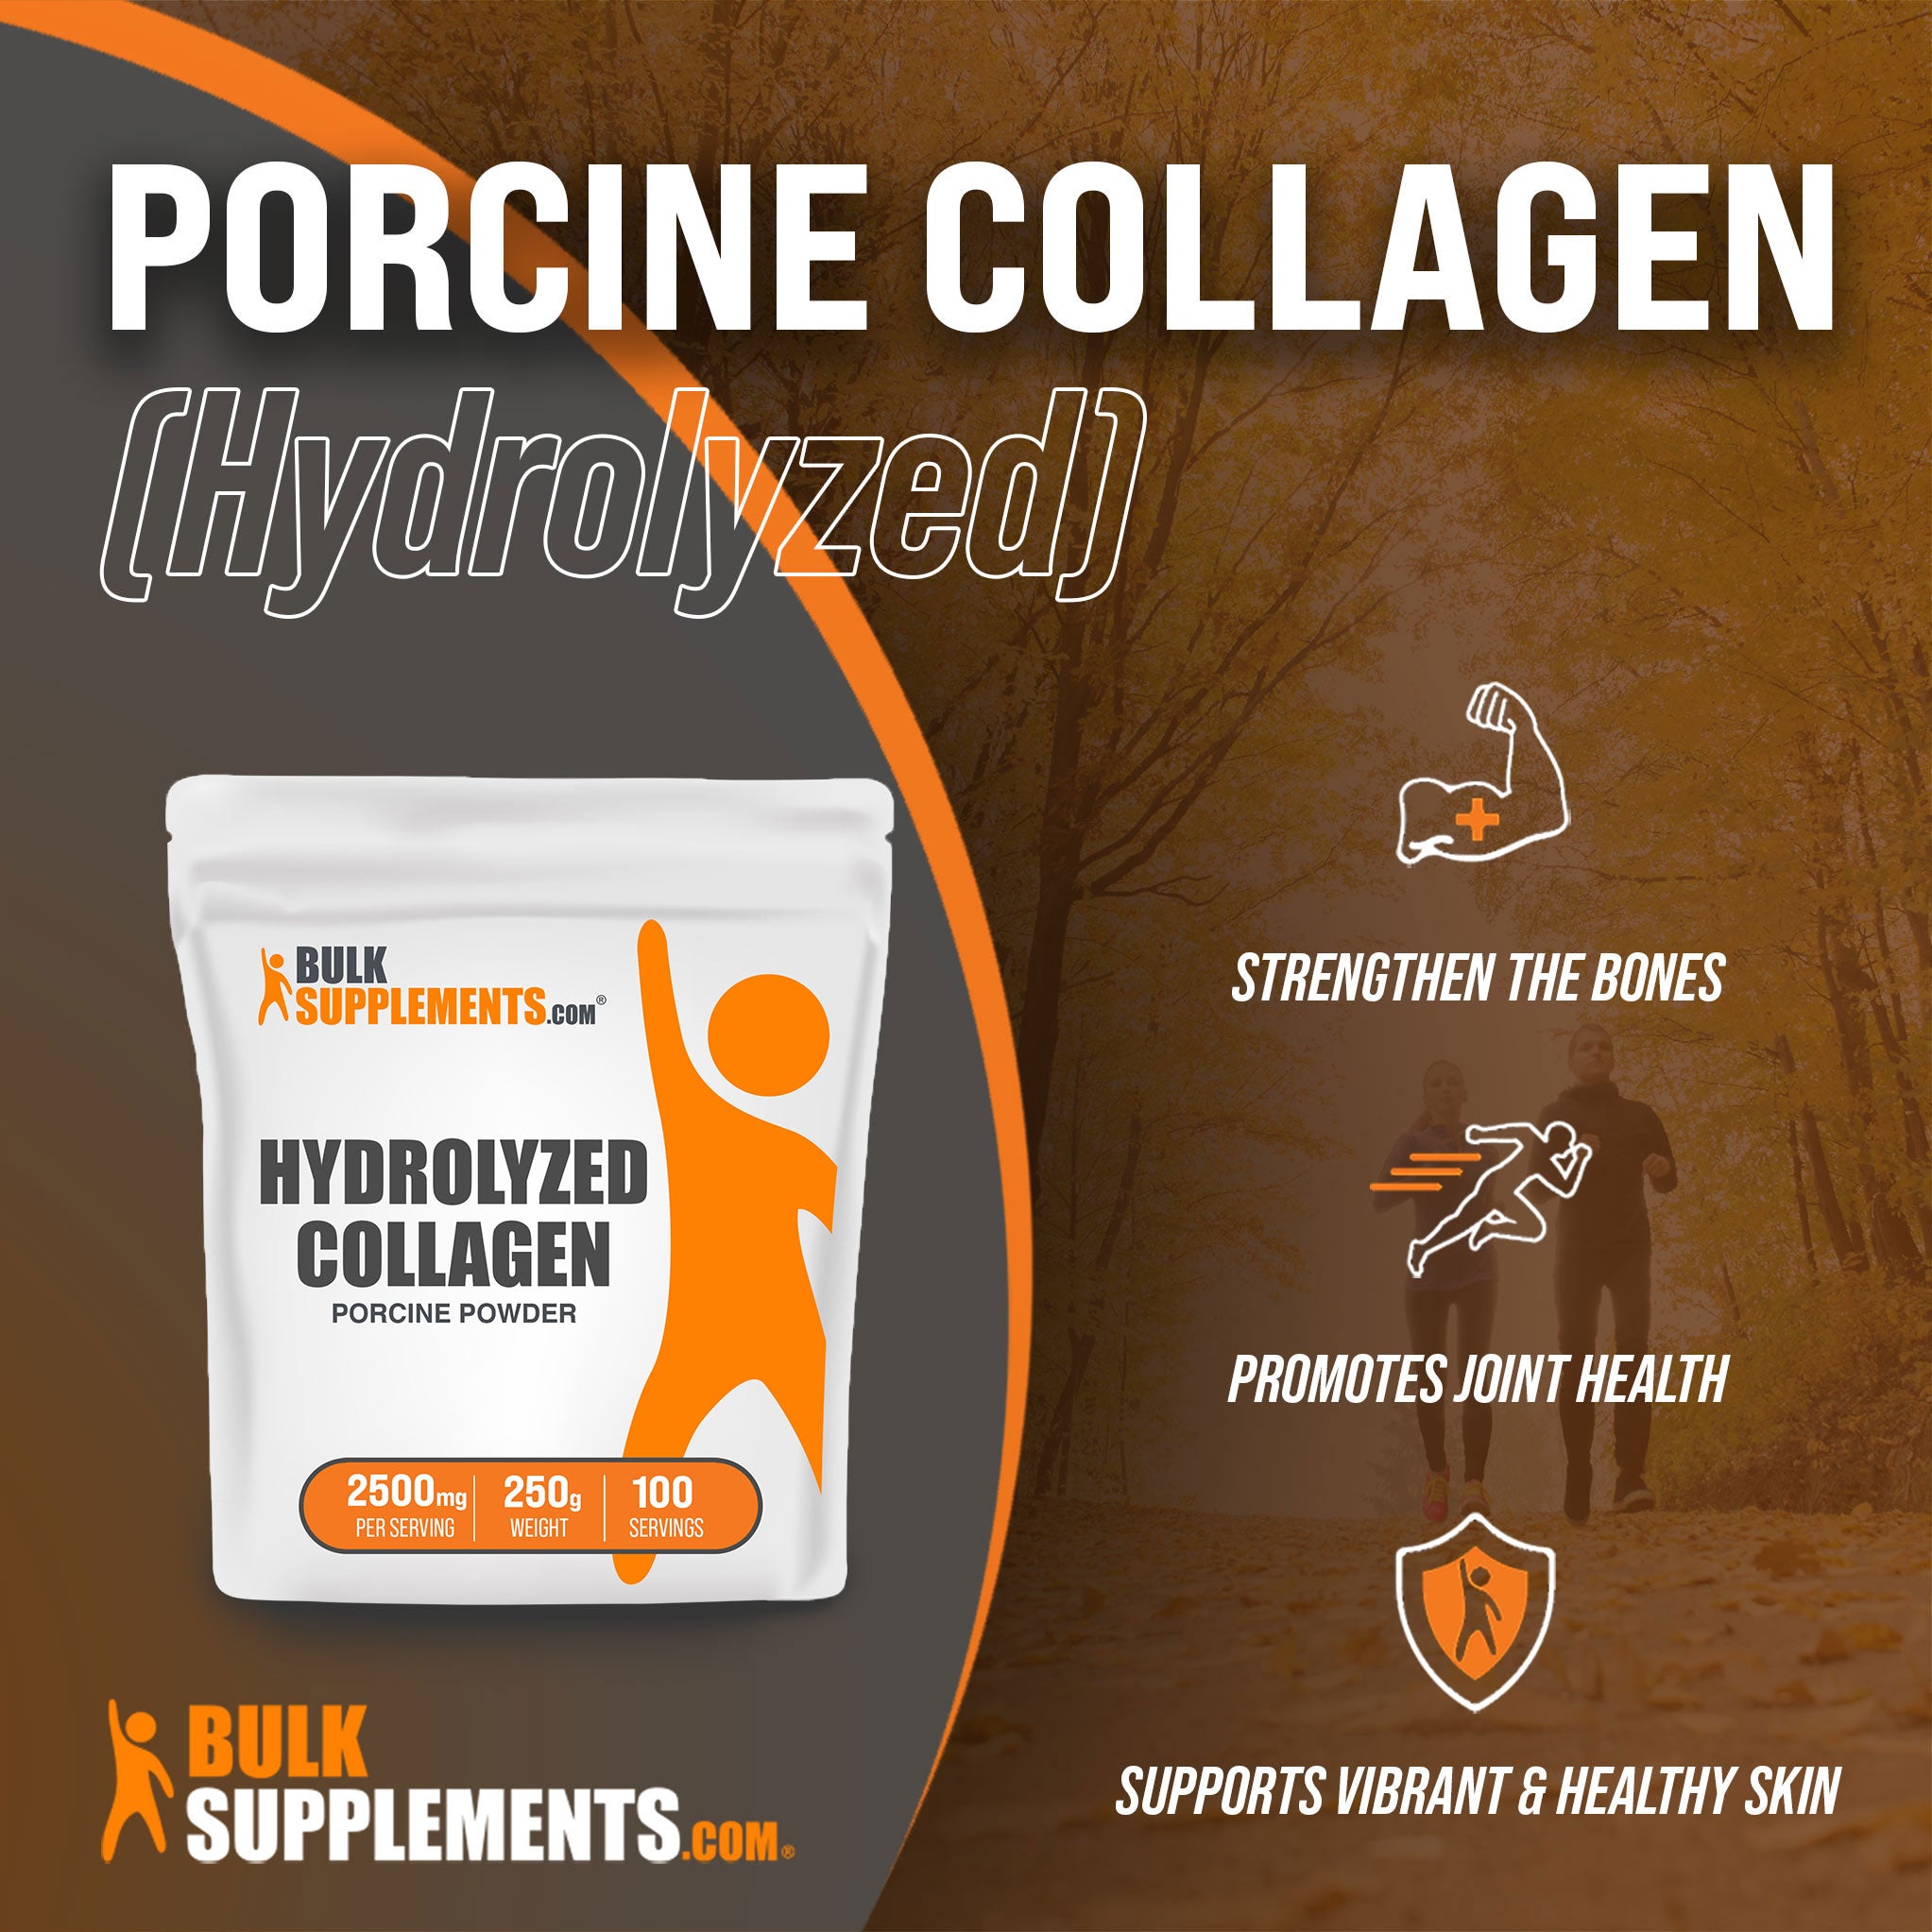 Benefits of Porcine Collagen Hydrolyzed; strengthen the bones, promotes joint health, supports vibrant and healthy skin